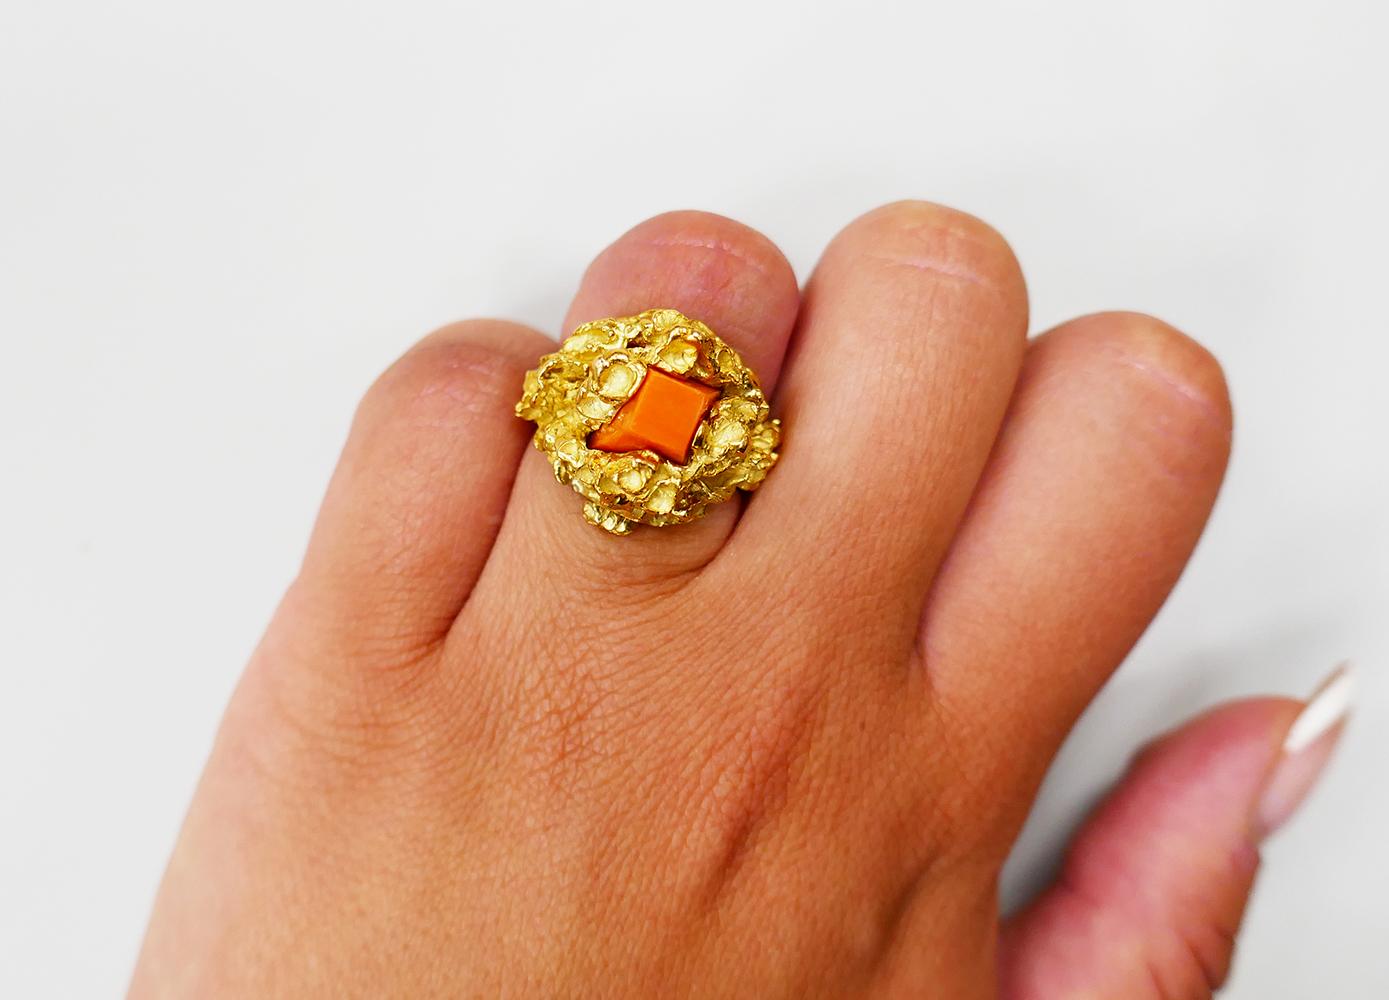 A unique Modernist ring by Chaumet, Paris made of 18 karat gold, featuring jade and coral (interchangeable). 

An abstract ring’s shape emphasizes the gold texture. The jade and coral are shaped as truncated cones. Their clean geometrical shape